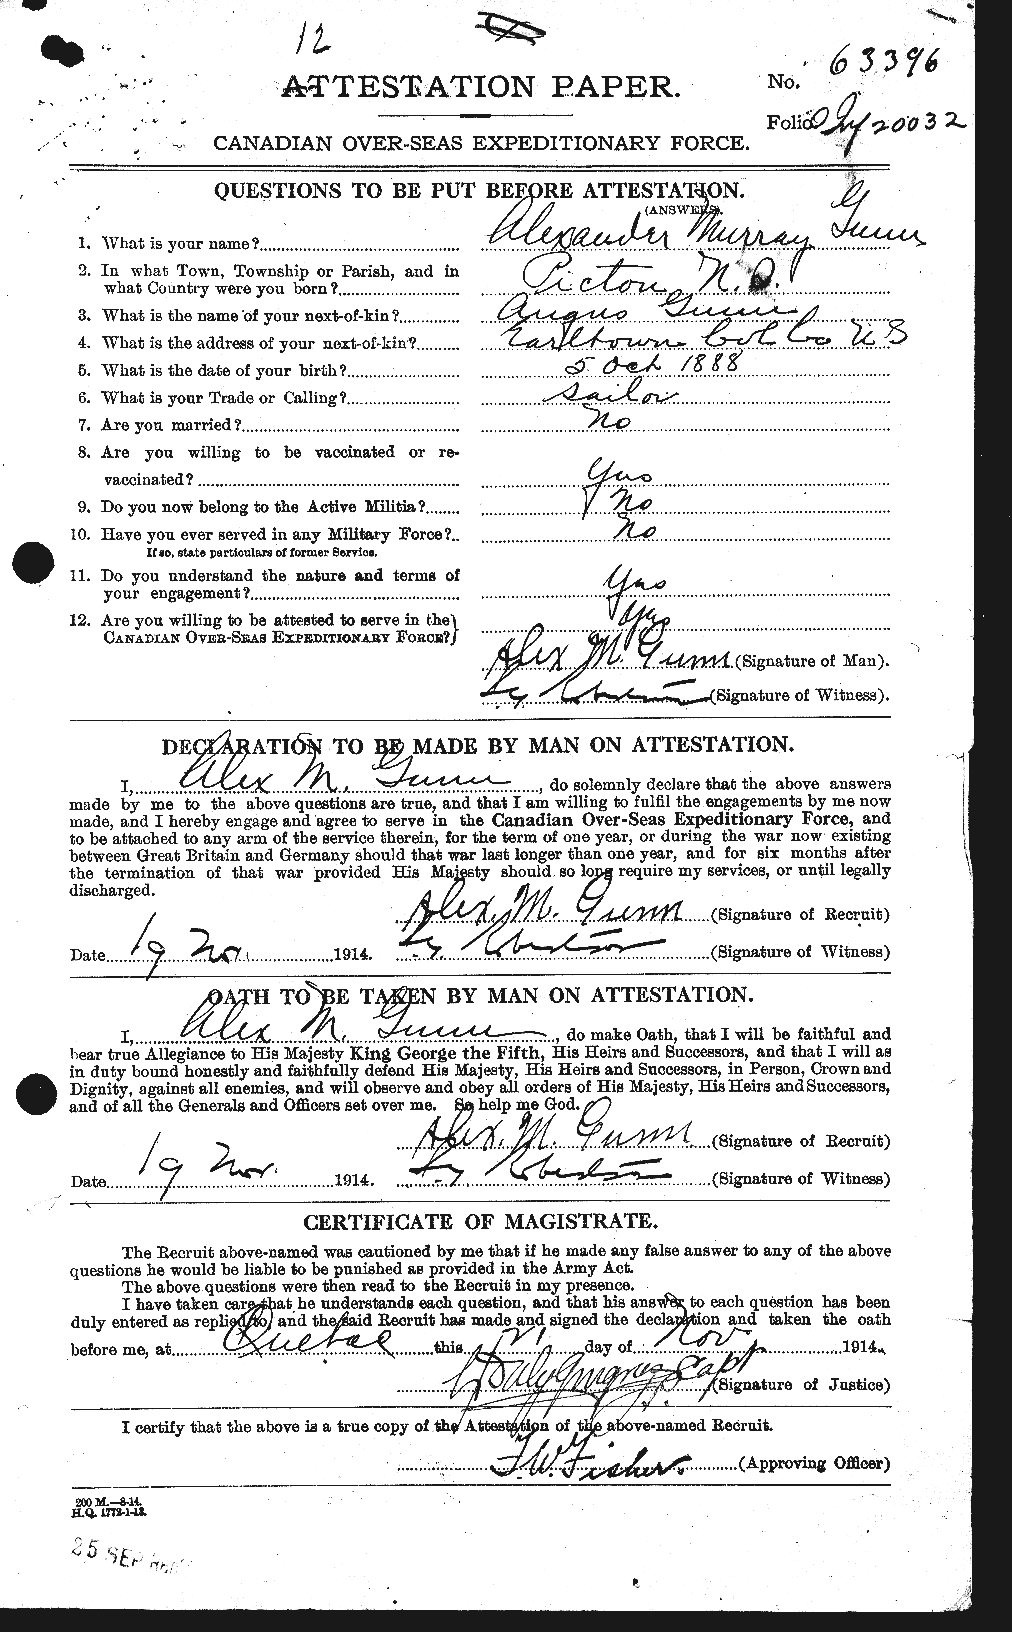 Personnel Records of the First World War - CEF 367993a